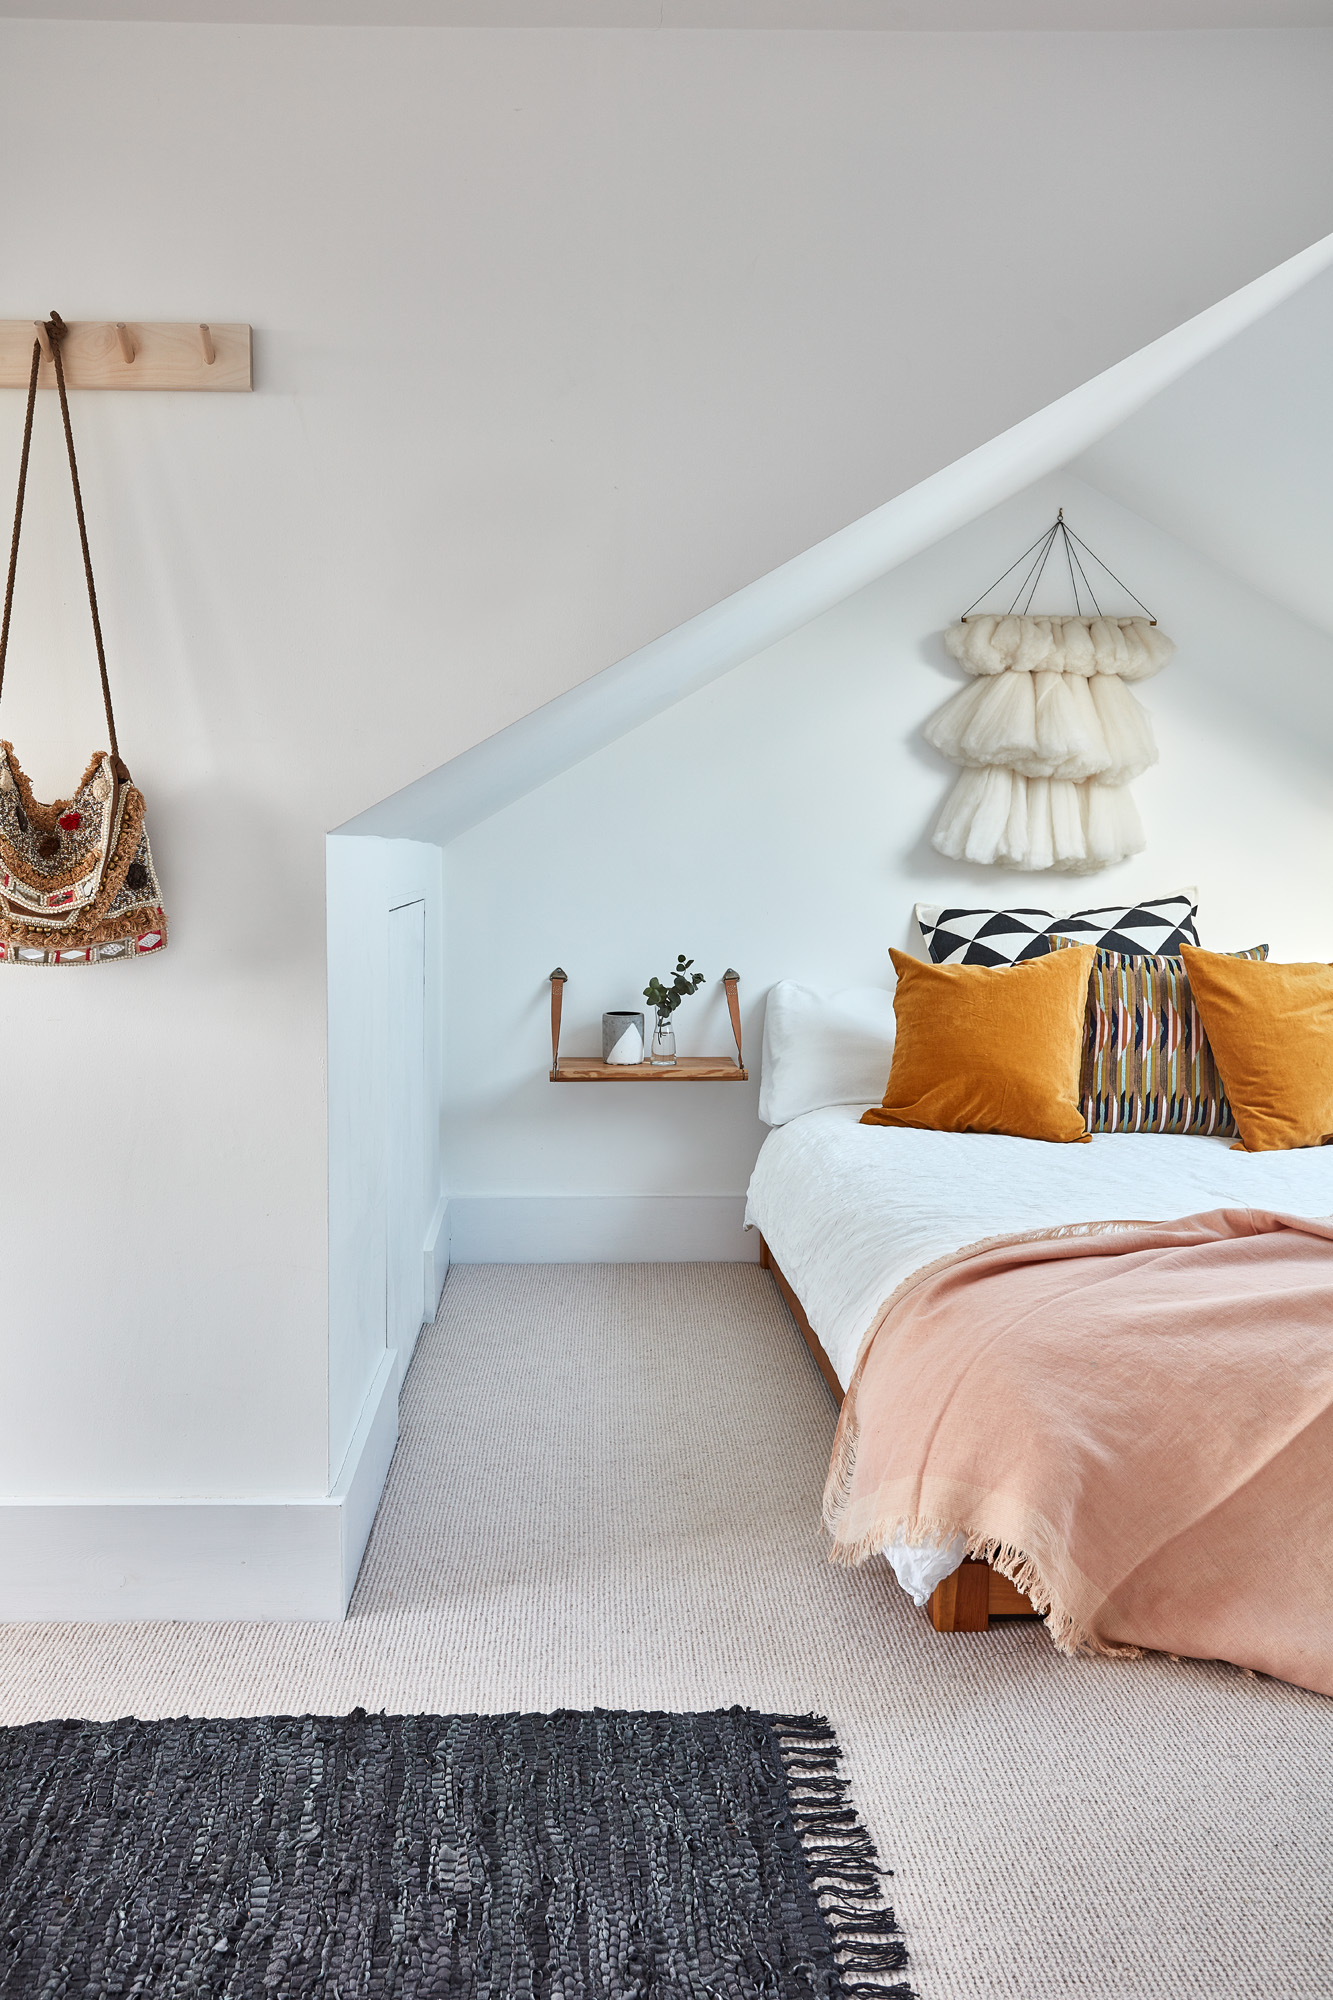 Lily Pickard house: loft bedroom with white walls, pink throw